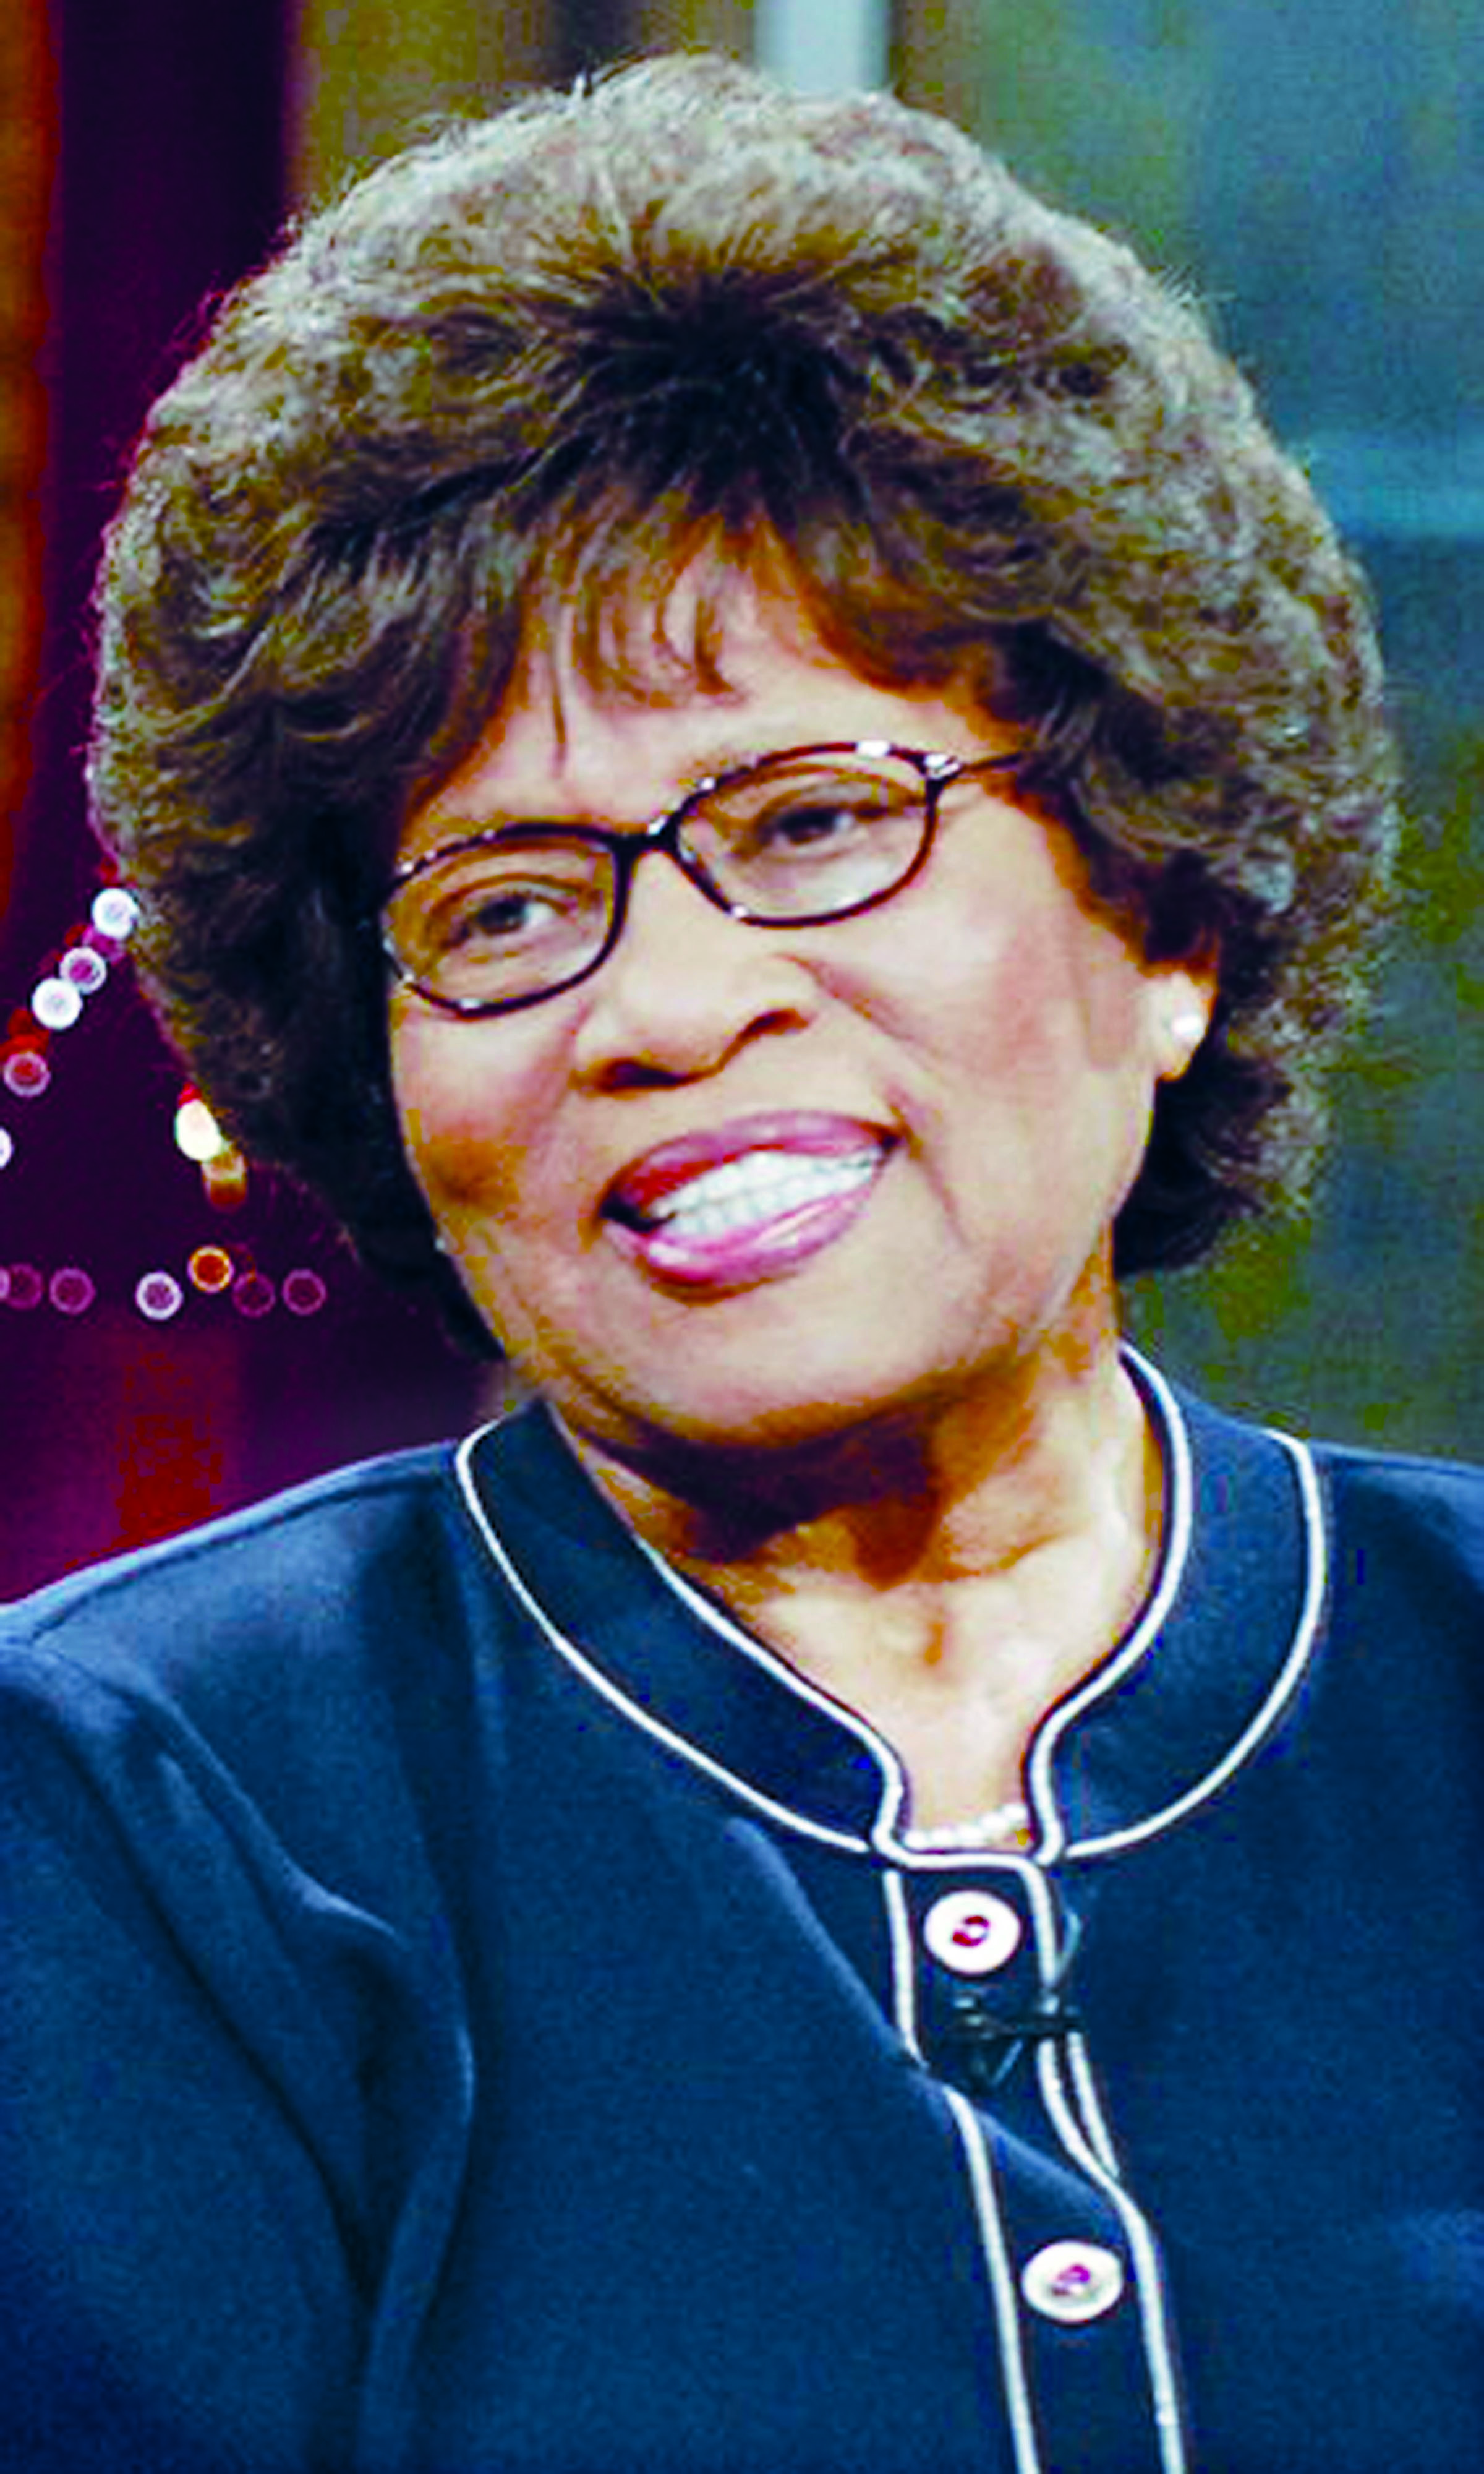 The outspoken Dr. Joycelyn Elders will speak at the Vern Burton Center at 5 p.m. Friday. Individual tickets are $100.